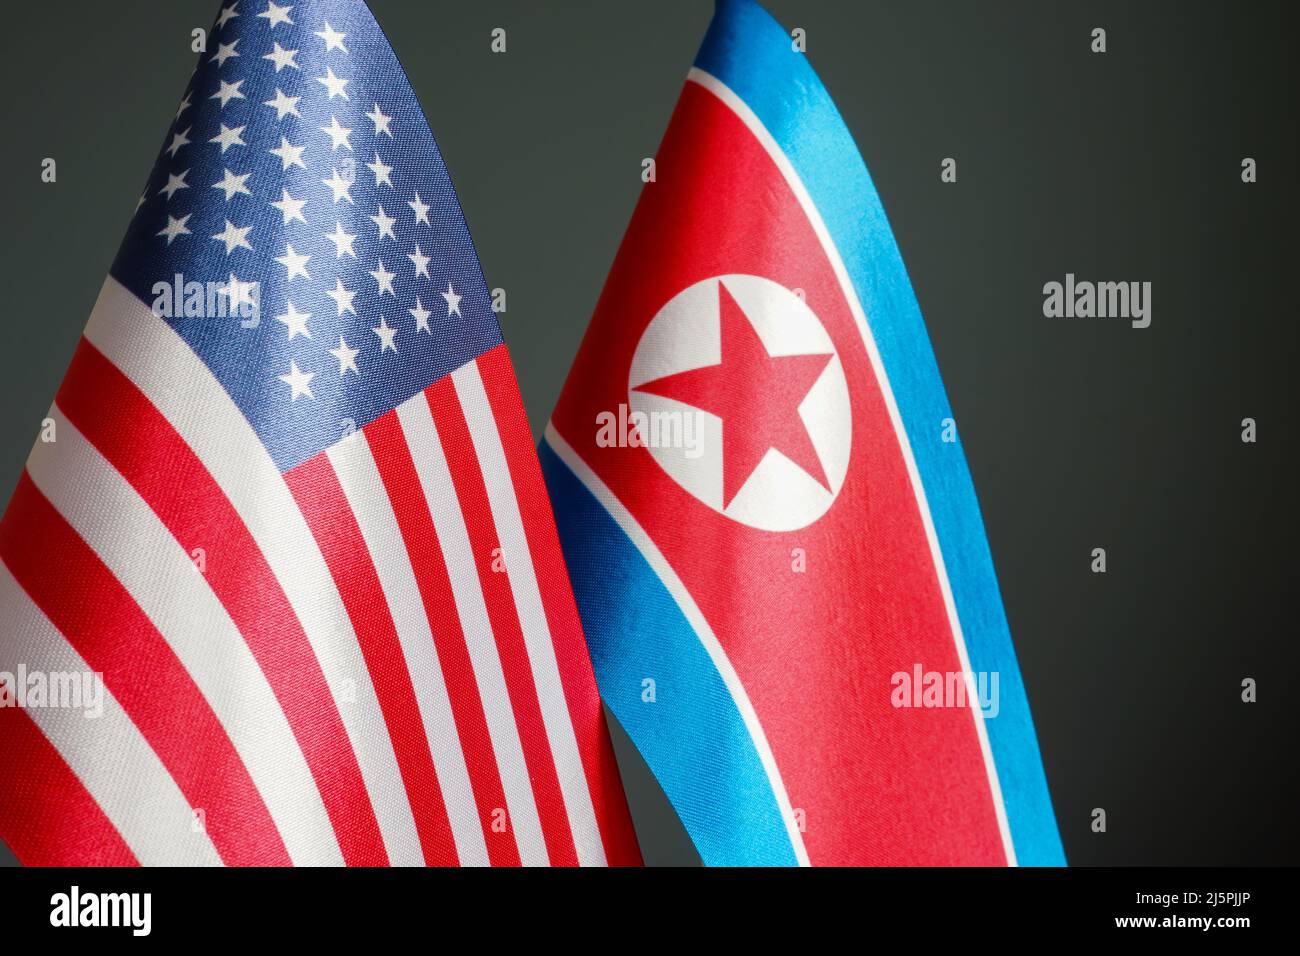 Flags of North Korea and the USA on a dark surface. Stock Photo